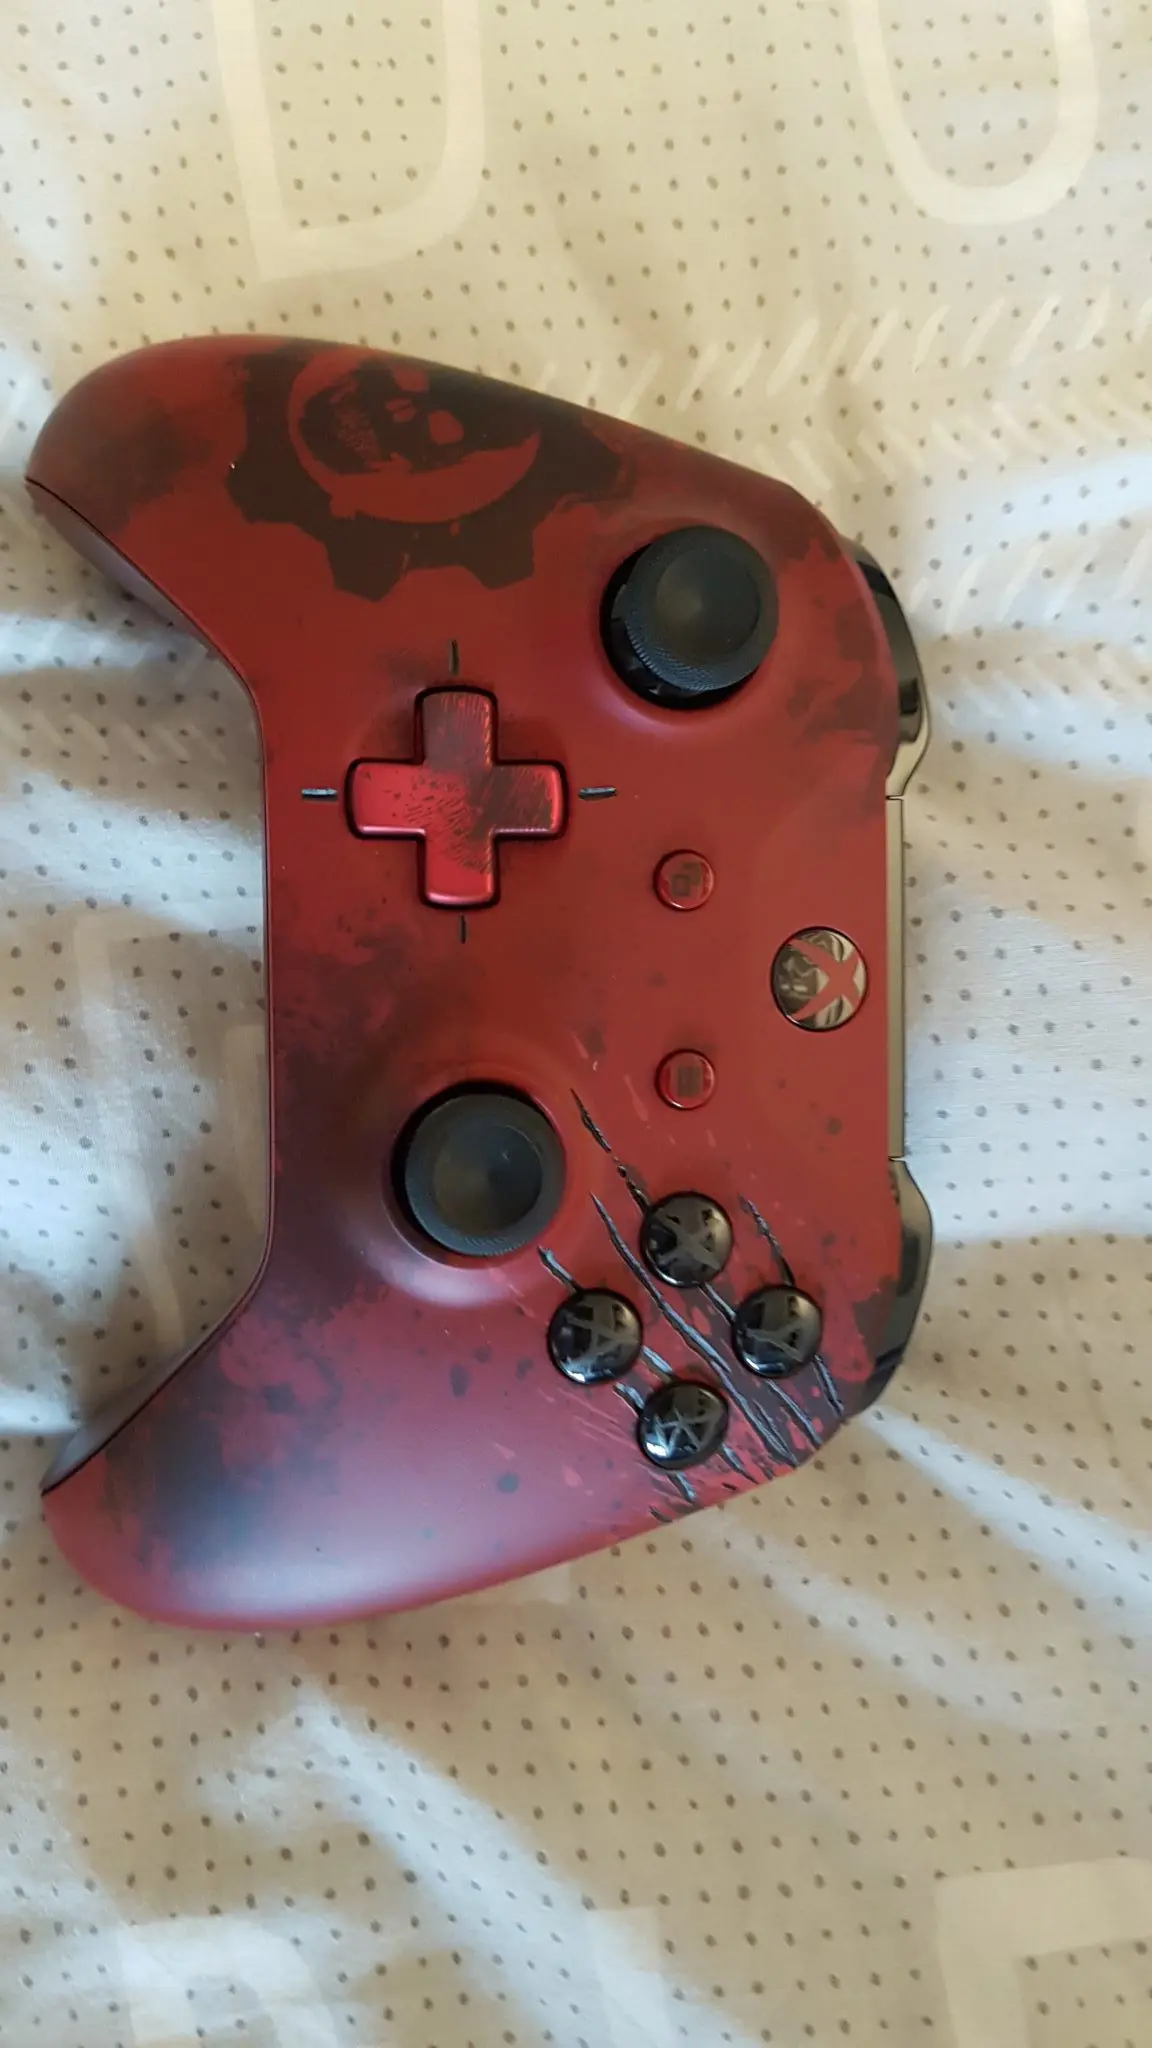 gears of war 4 xbox one s controller